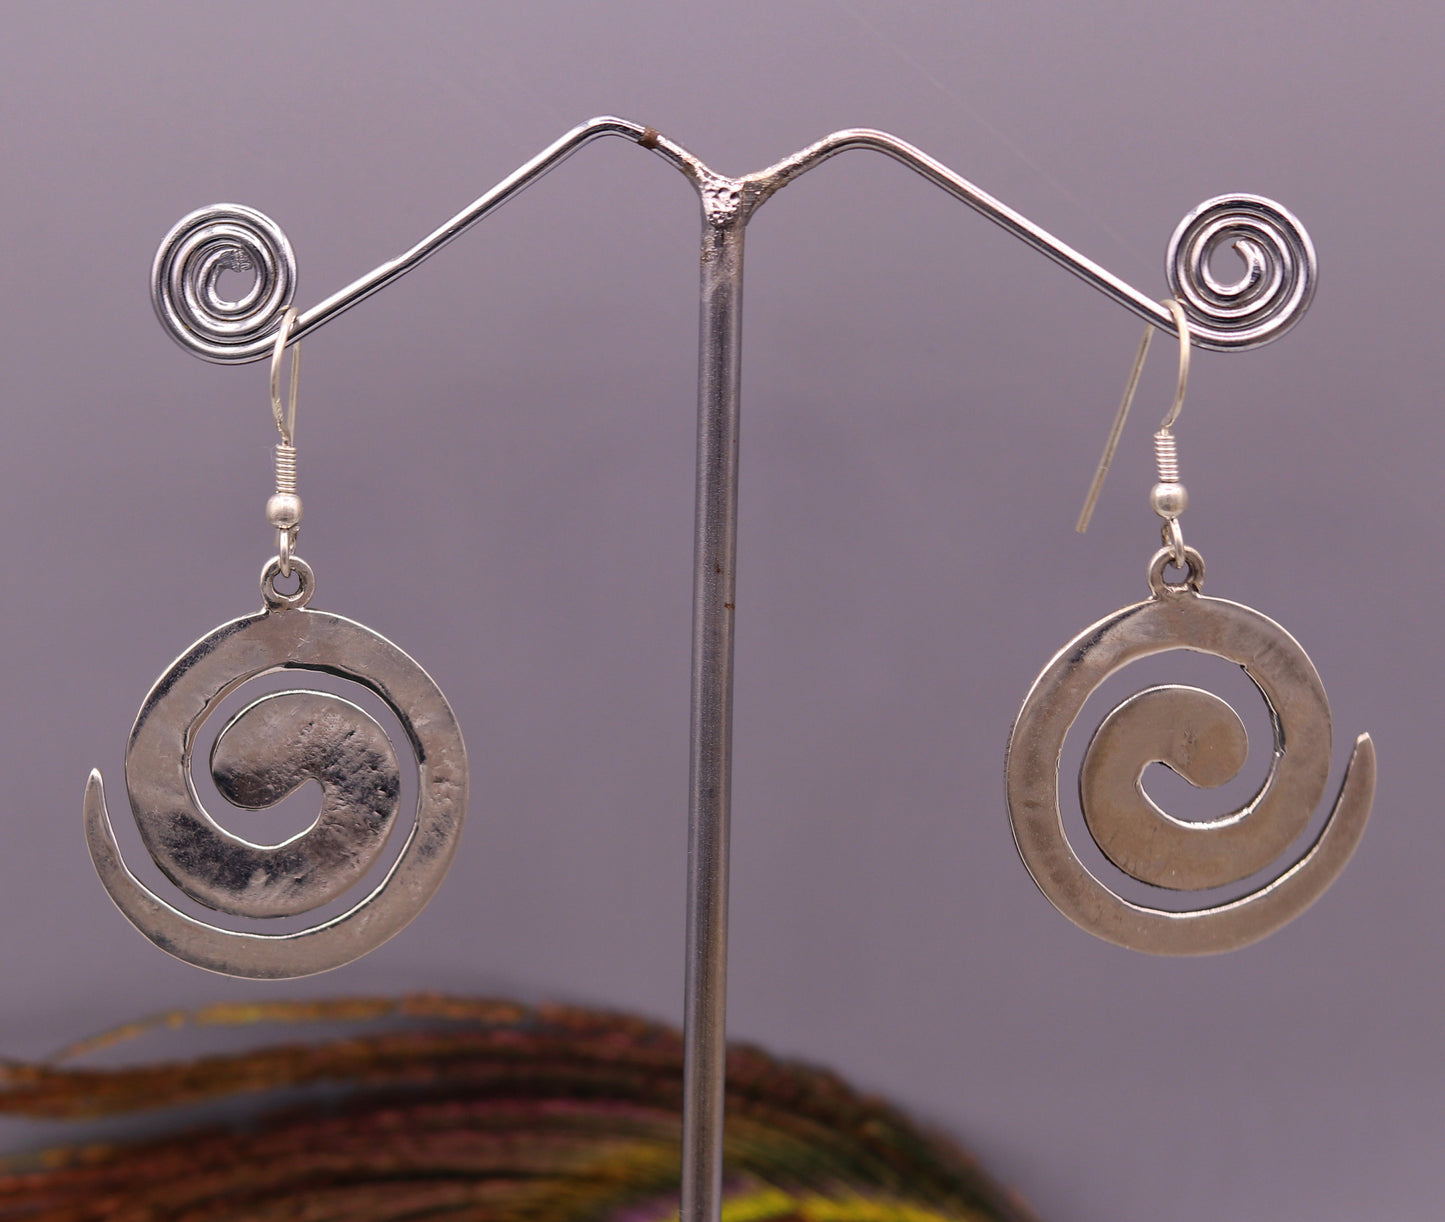 Amazing spiral design 925 solid sterling silver scratch link fancy hoops earrings tribal jewelry from Rajasthan india daily use jewelry s420 - TRIBAL ORNAMENTS